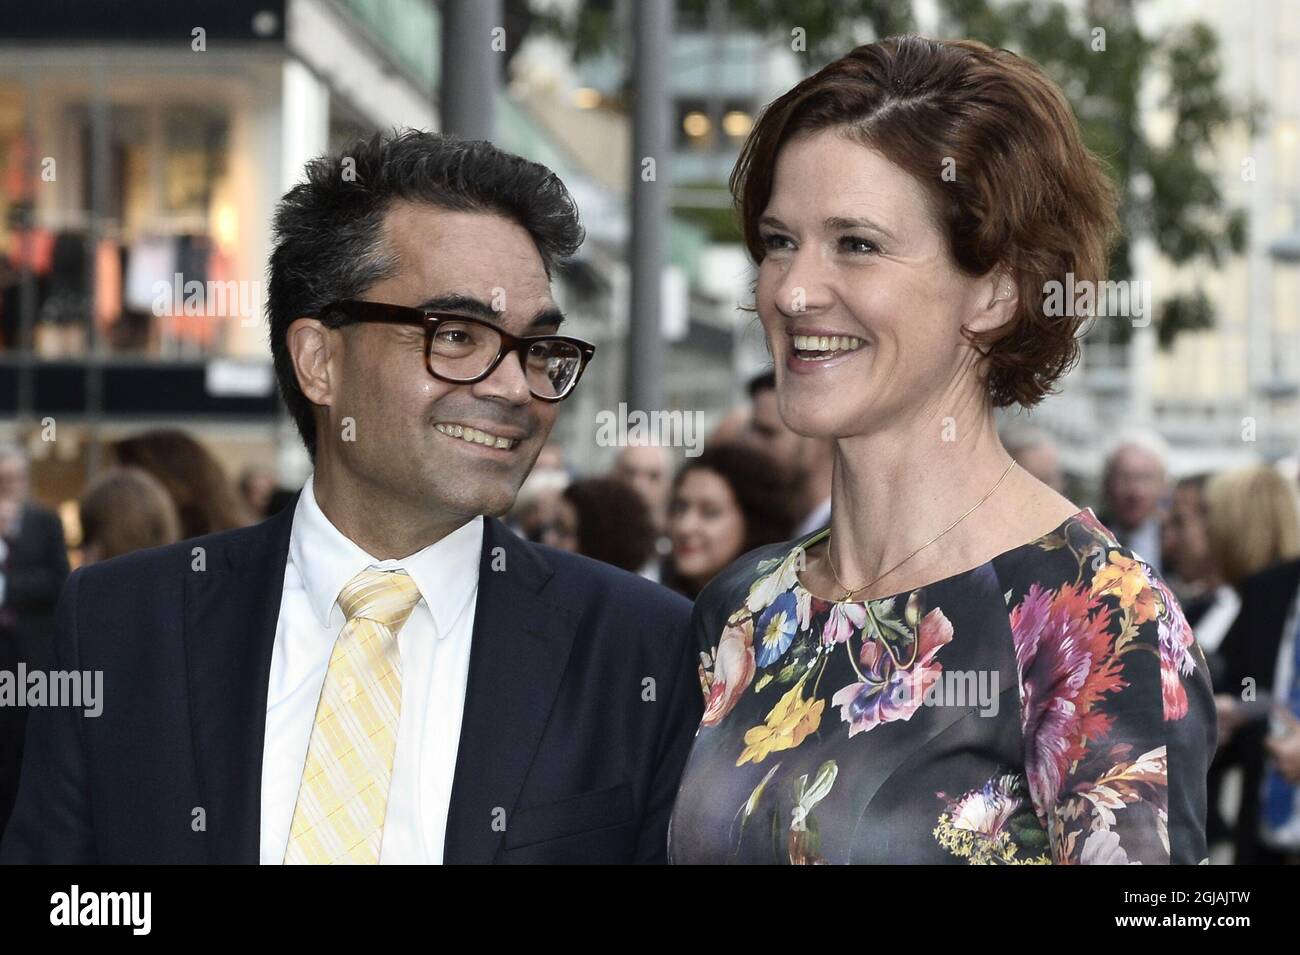 STOCKHOLM 20160913 Swedish comedian David Batra (L) and his wife Anna Kinberg Batra, Swedish Moderate Party leader arrive for a concert at Konserthuset Stockholm on Sept. 13, 2016. Photo: Claudio Bresciani / TT / code 10090  Stock Photo